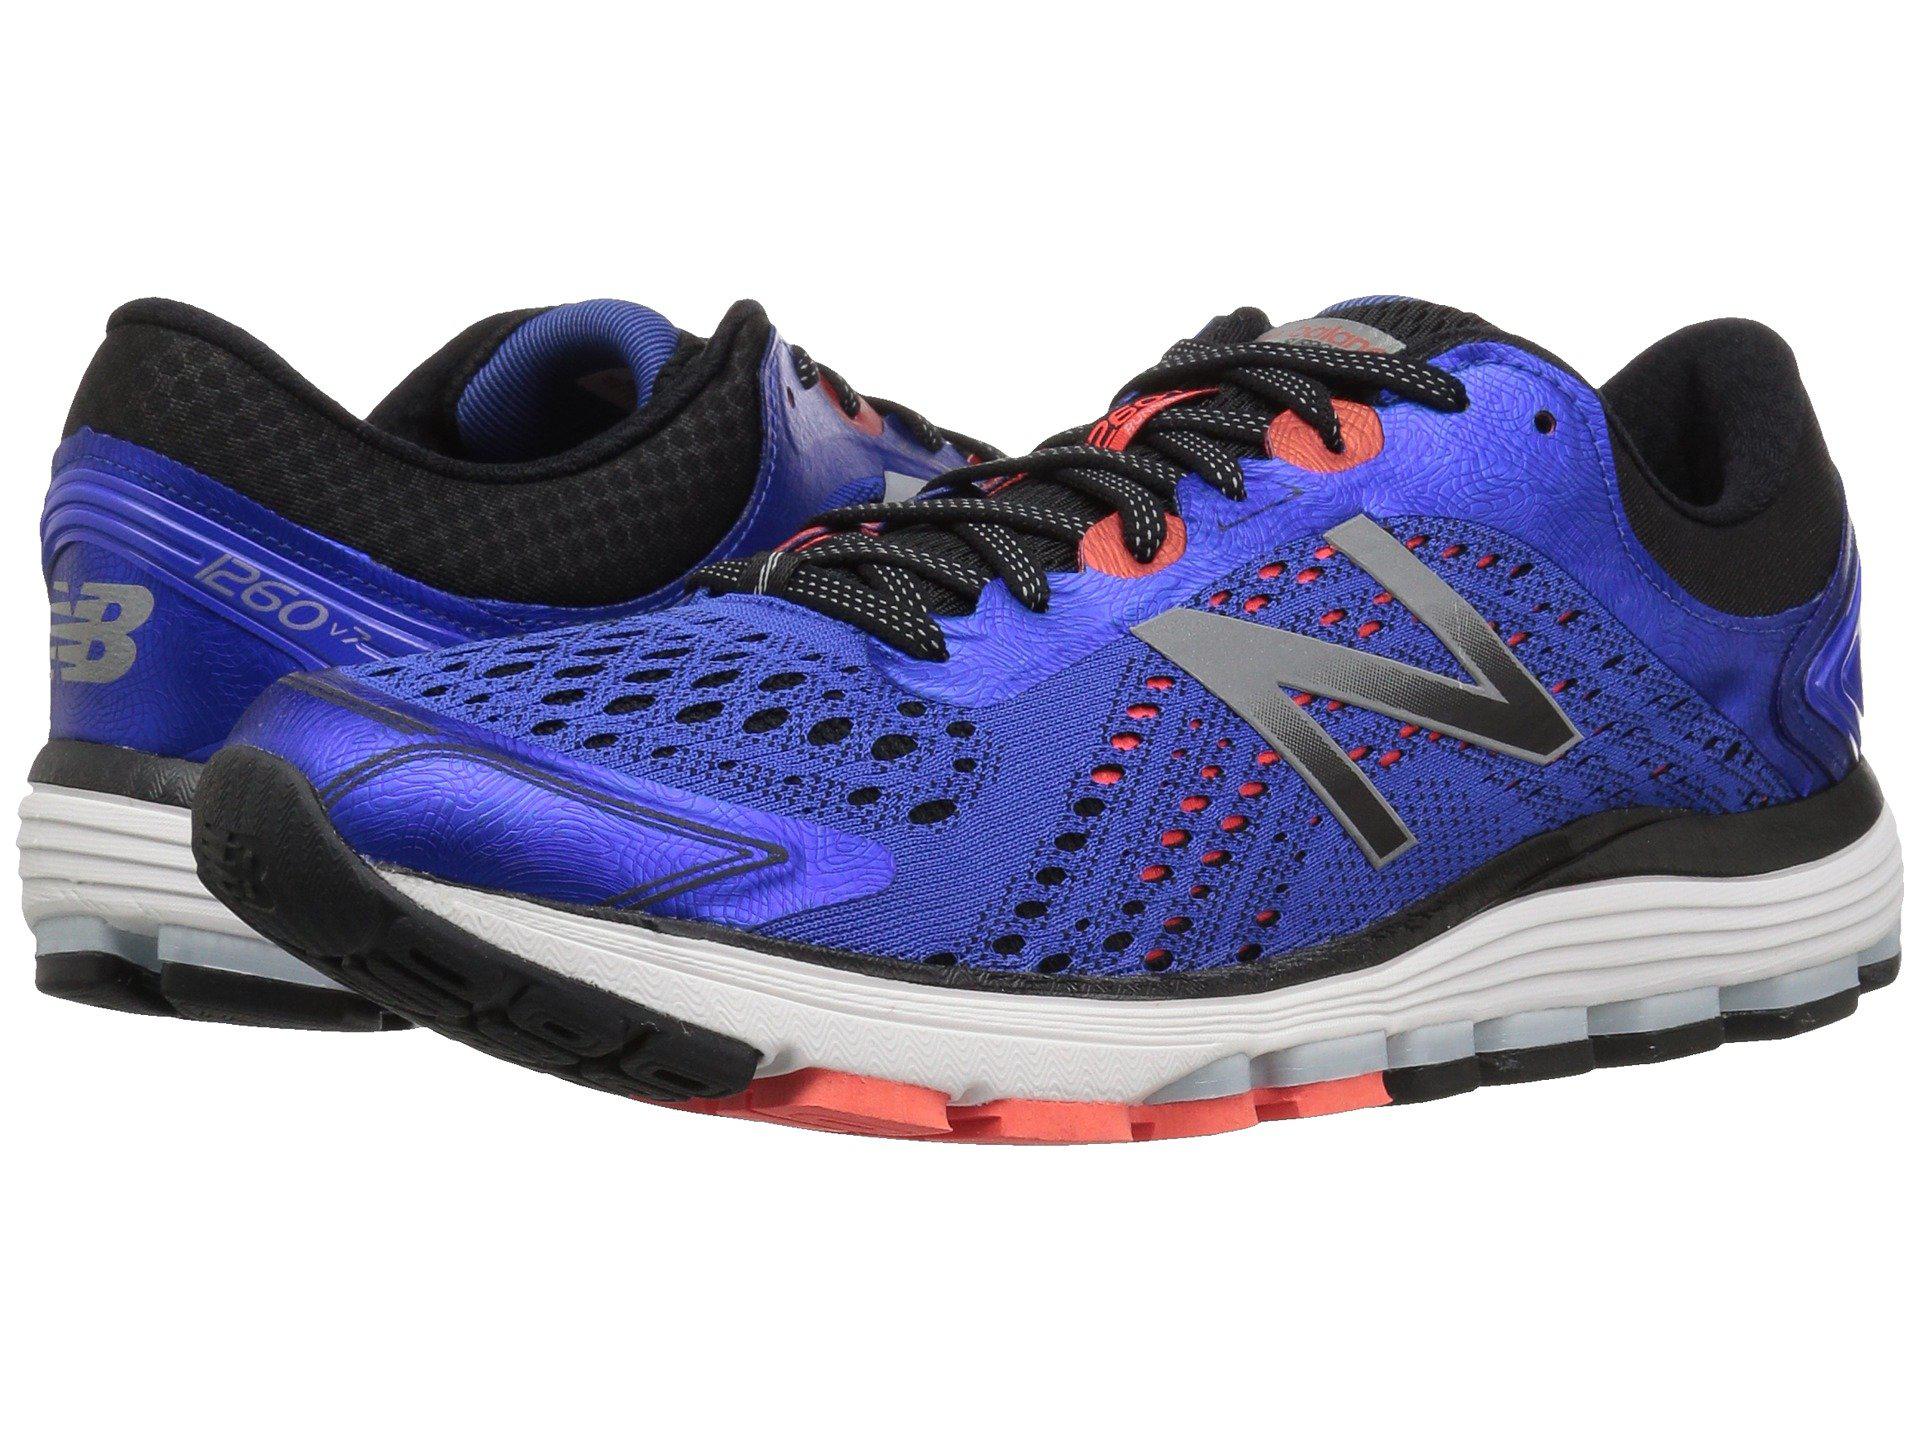 New Balance Synthetic 1260 V7 (pacific/black/flame) Men's Running Shoes in  Blue for Men - Lyst